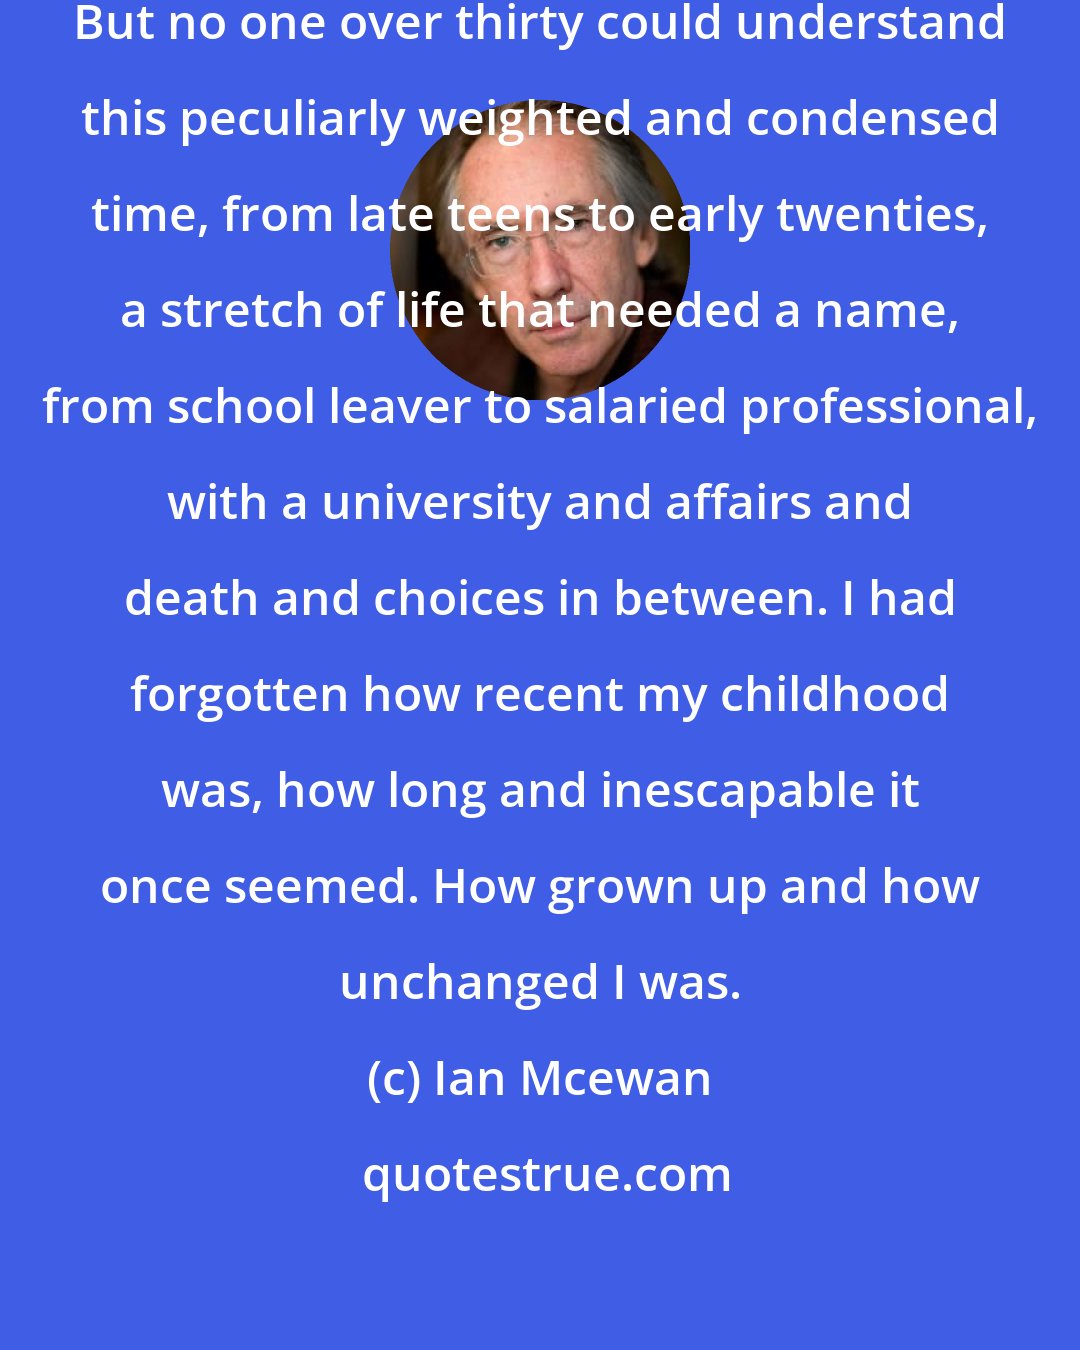 Ian Mcewan: Four or five years - nothing at all. But no one over thirty could understand this peculiarly weighted and condensed time, from late teens to early twenties, a stretch of life that needed a name, from school leaver to salaried professional, with a university and affairs and death and choices in between. I had forgotten how recent my childhood was, how long and inescapable it once seemed. How grown up and how unchanged I was.